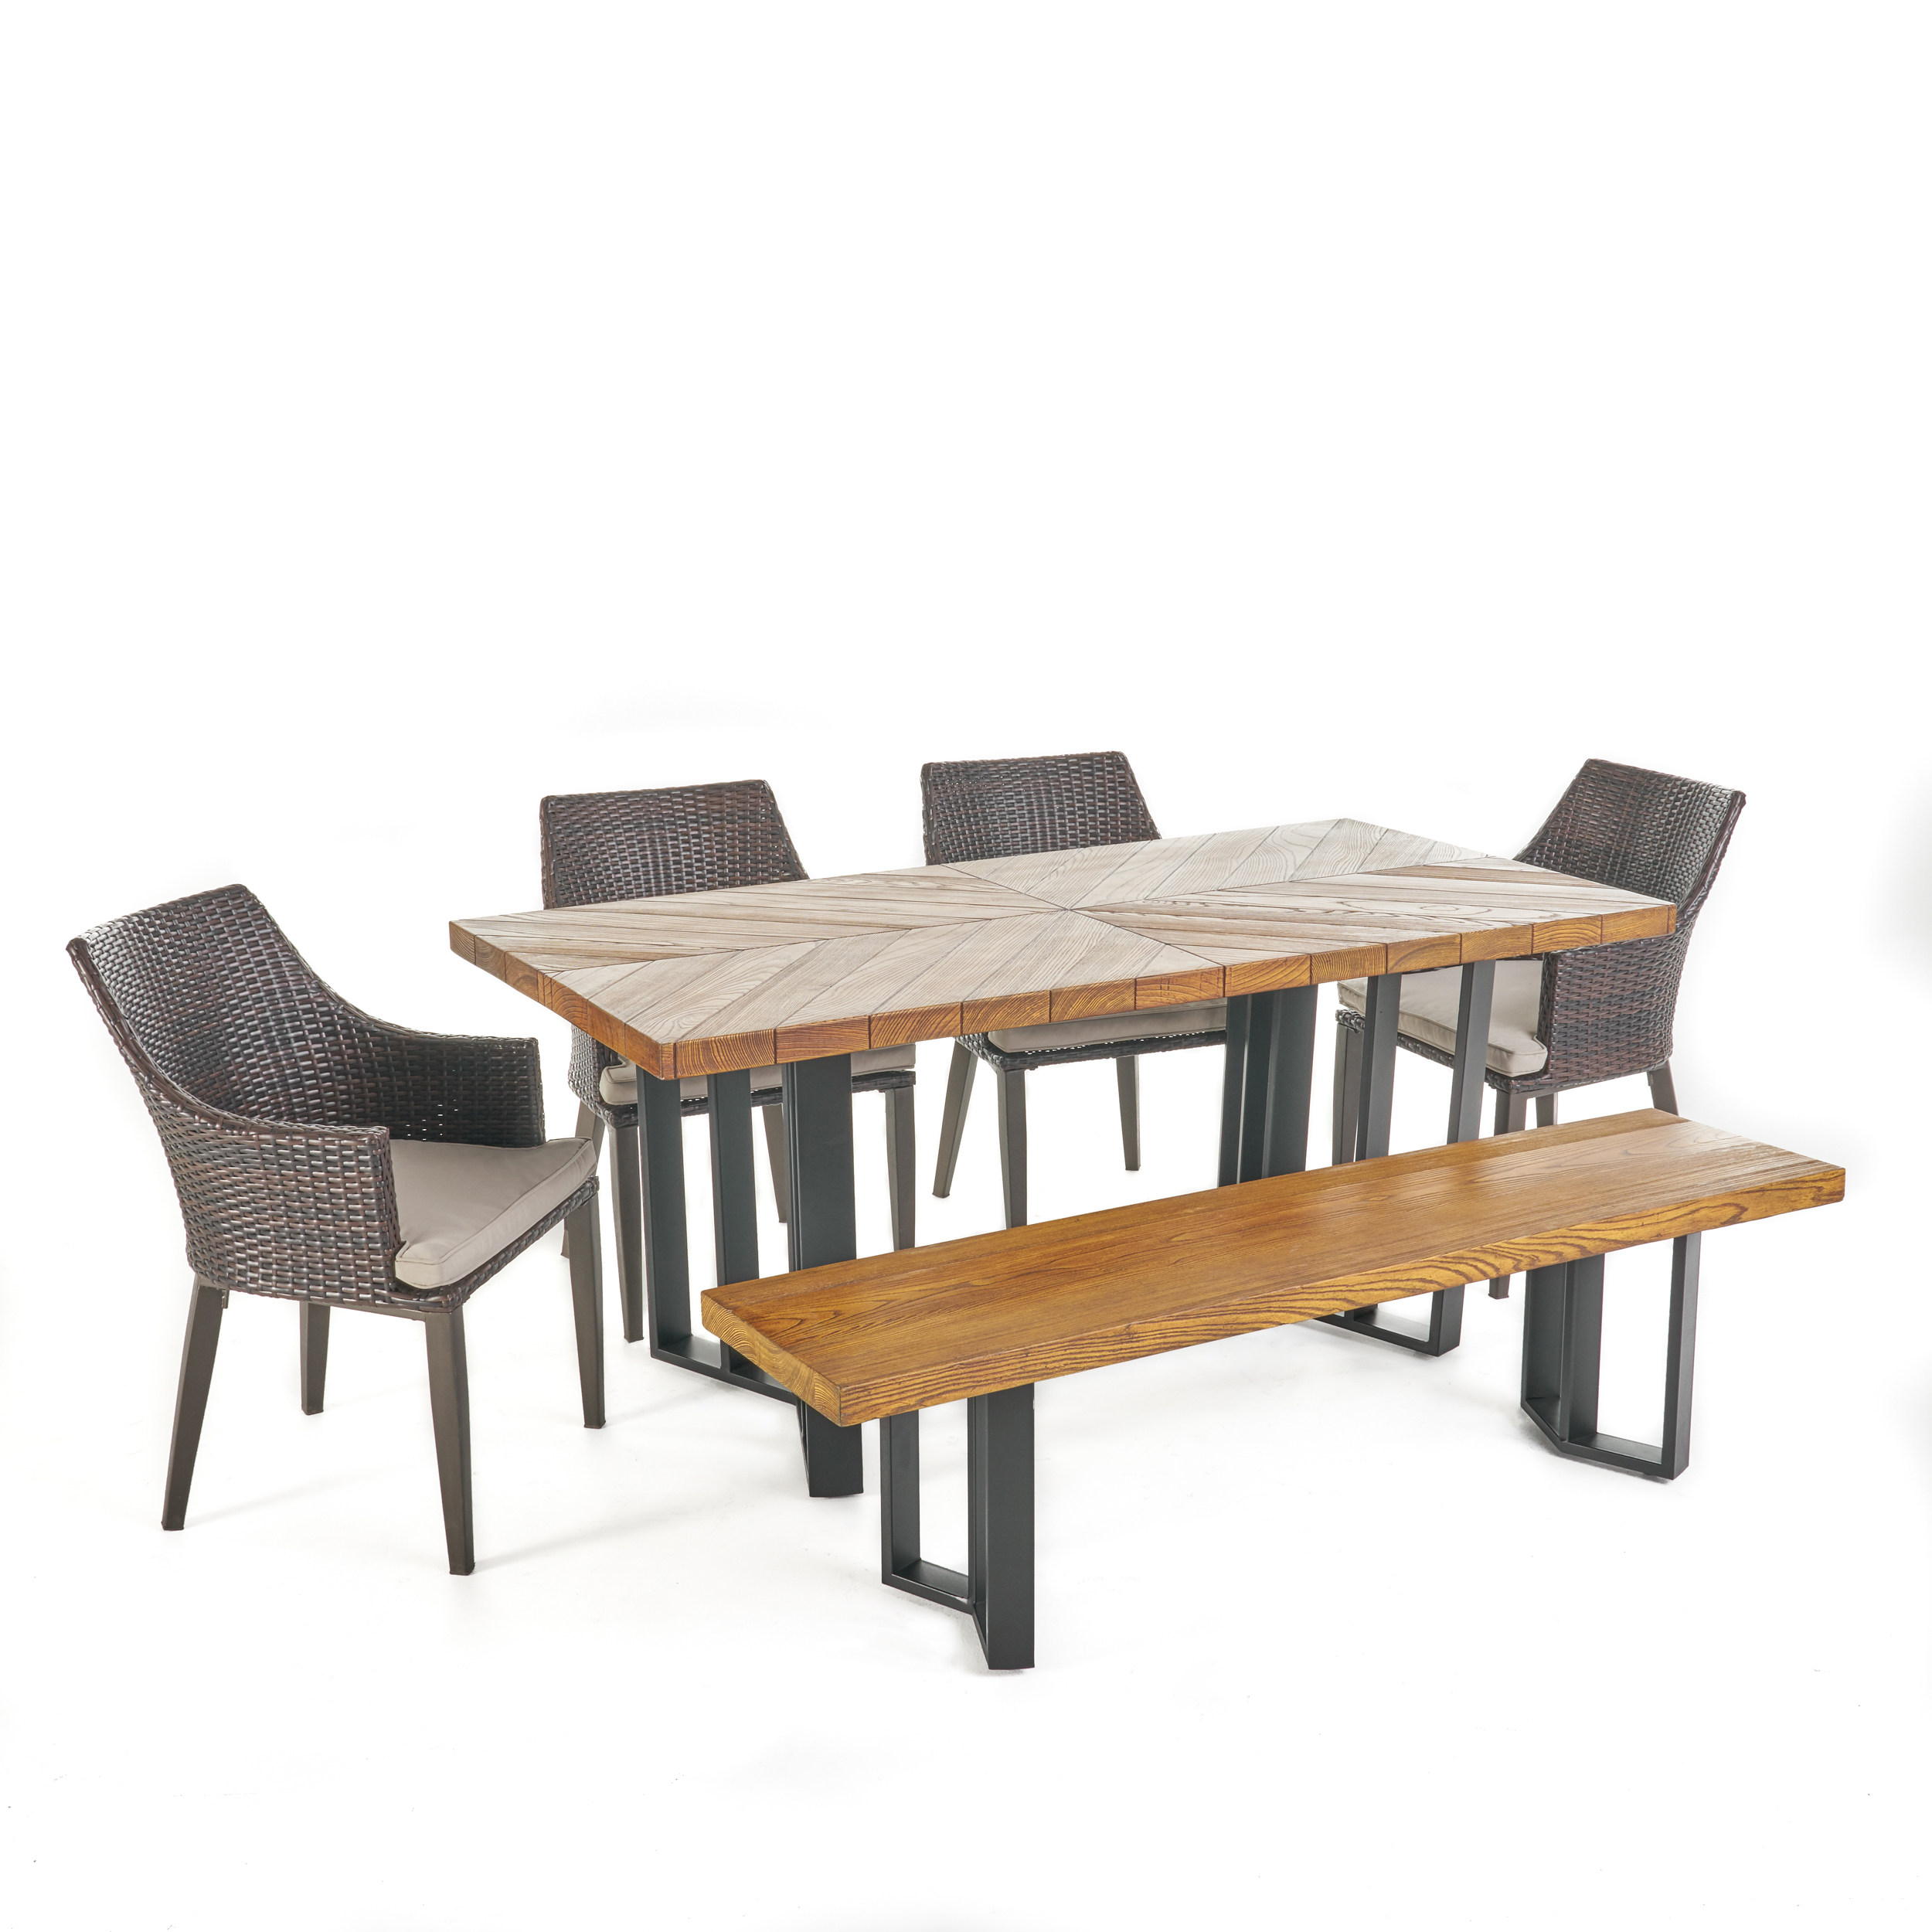 GDF Studio Sayveon Outdoor Wicker and Lightweight Concrete 6 Piece Dining Set with Bench, Textured Brown Walnut, Multibrown, and Black - image 1 of 13